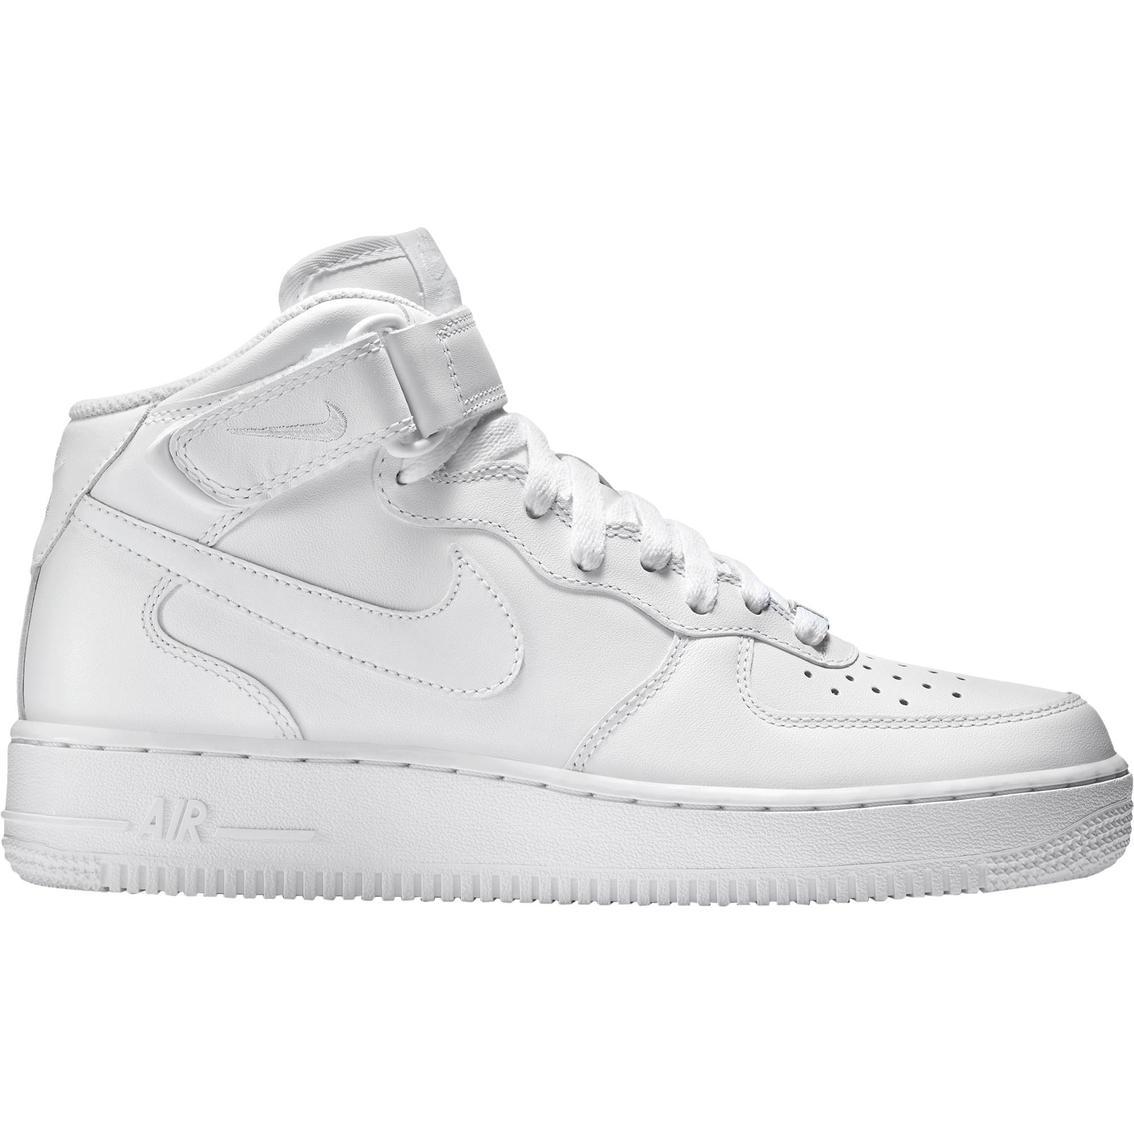 Nike Men S Air Force 1 Mid 07 Lifestyle Shoes Sneakers Shoes Shop The Exchange